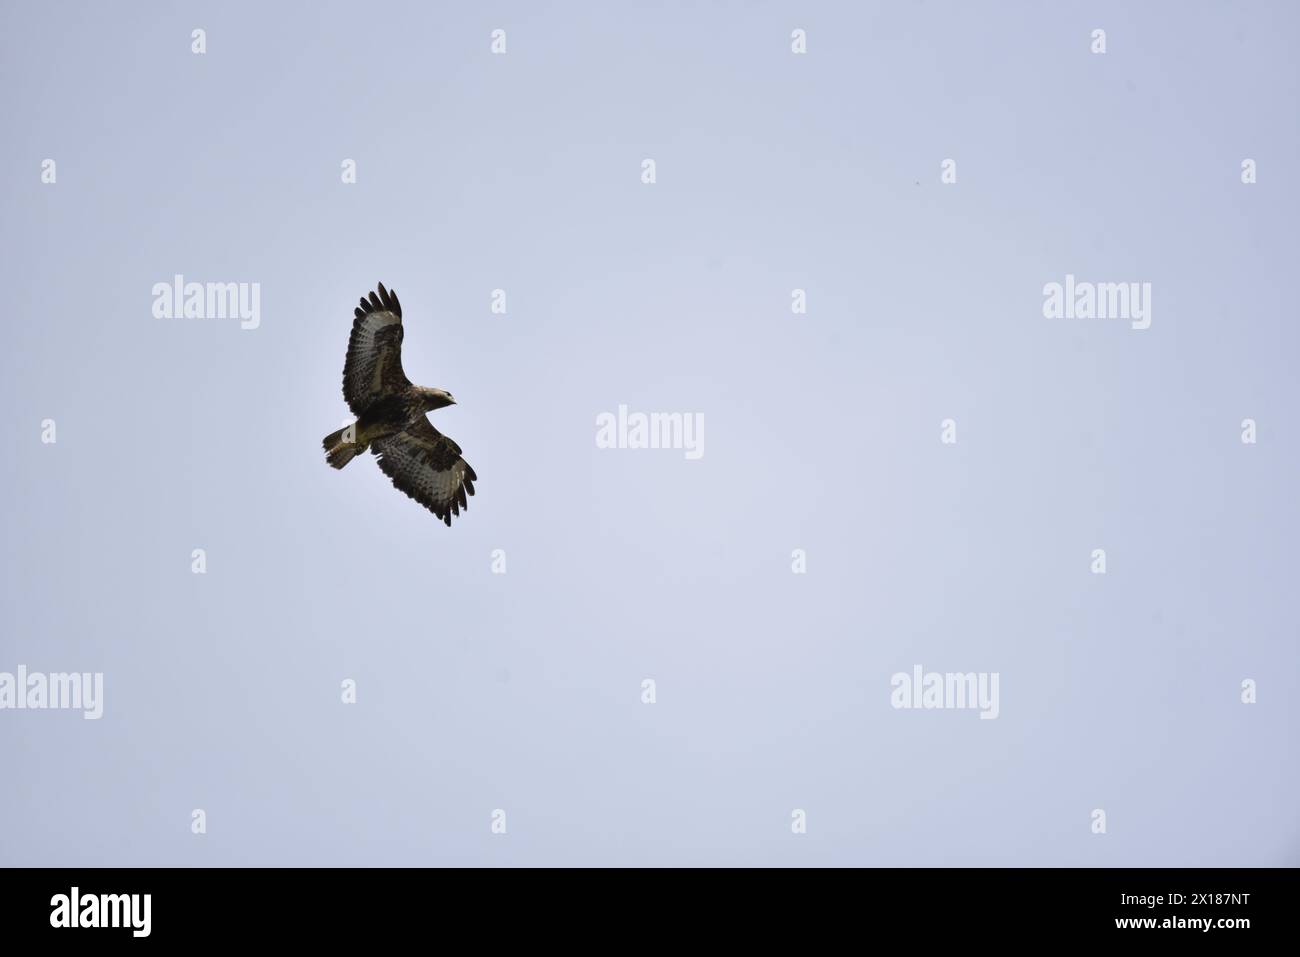 Common Buzzard (Buteo buteo) Flying from Left to Right, Left of Image, against a Pale Blue Sky, taken in mid-Wales, UK in April Stock Photo